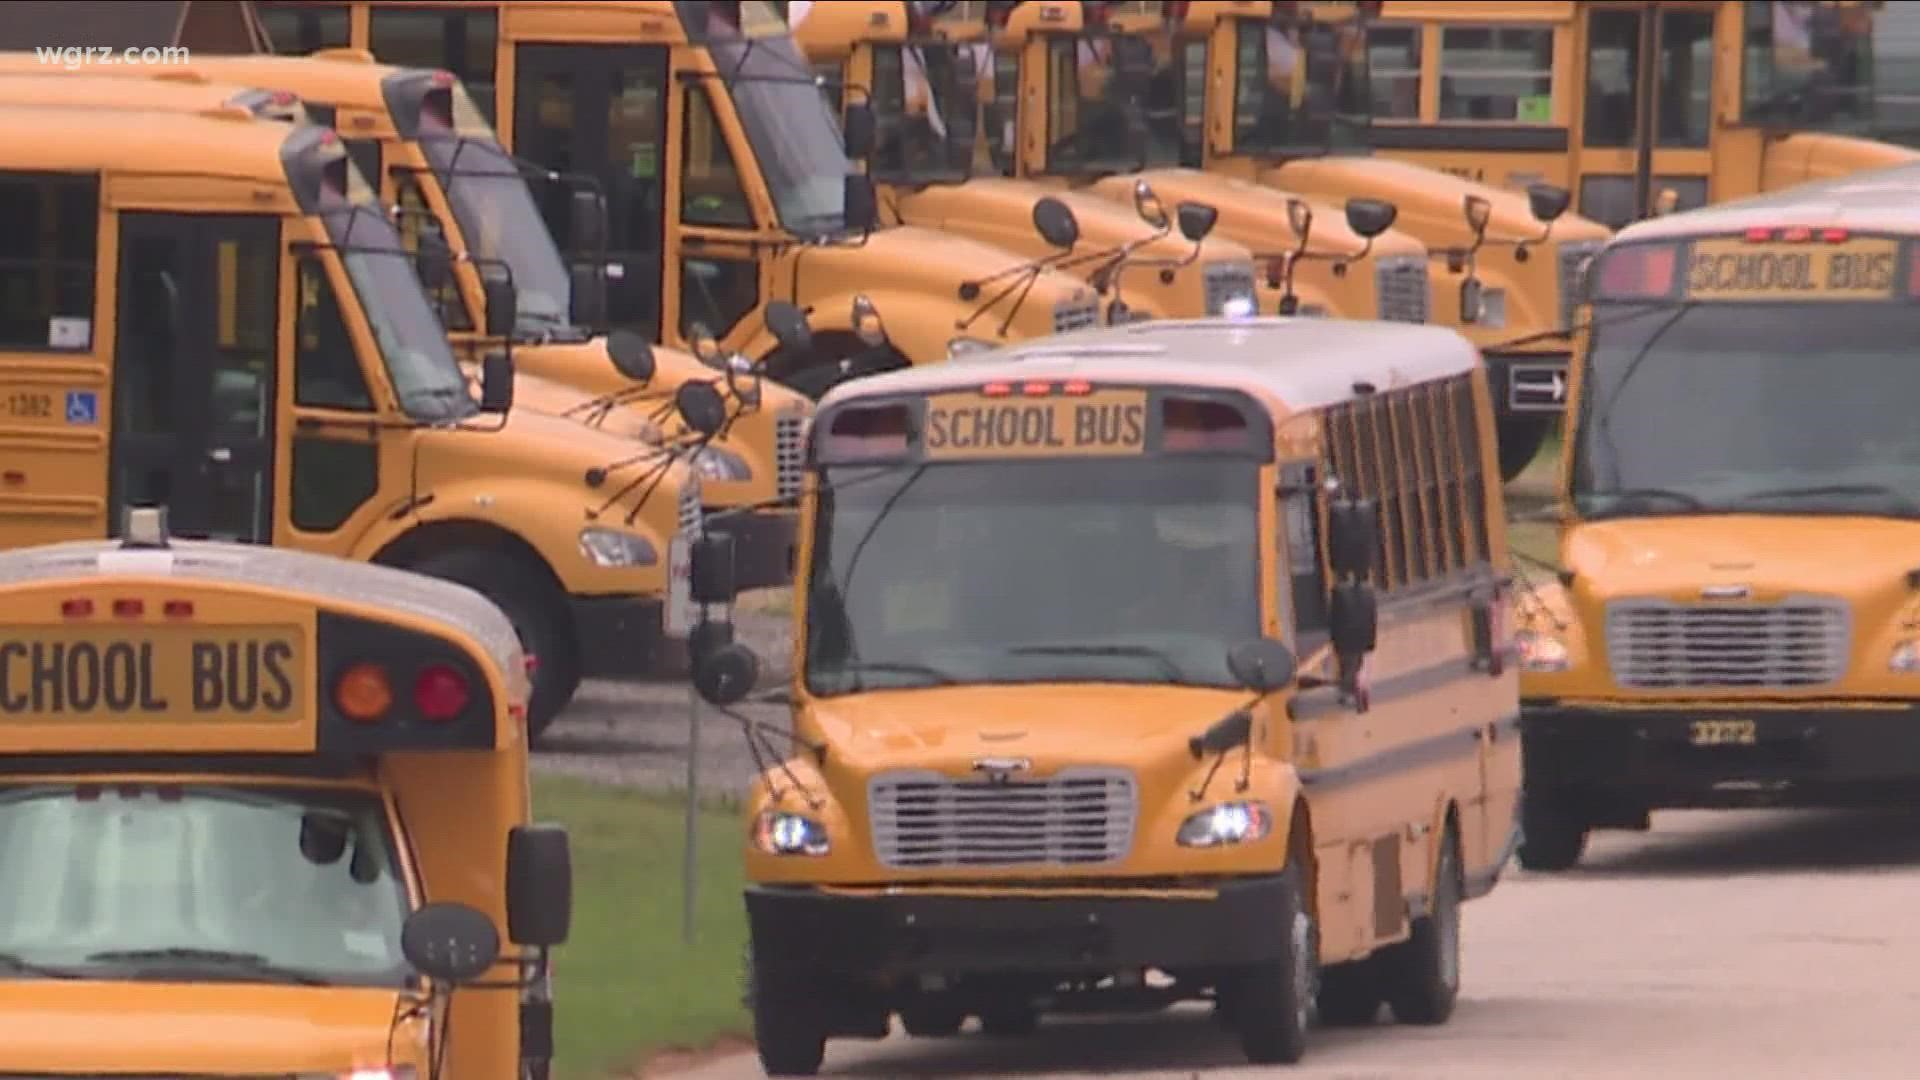 Superintendent Dr. Kriner Cash said that in a normal year, the district would have 667 drivers, but right now they are operating with around 515.